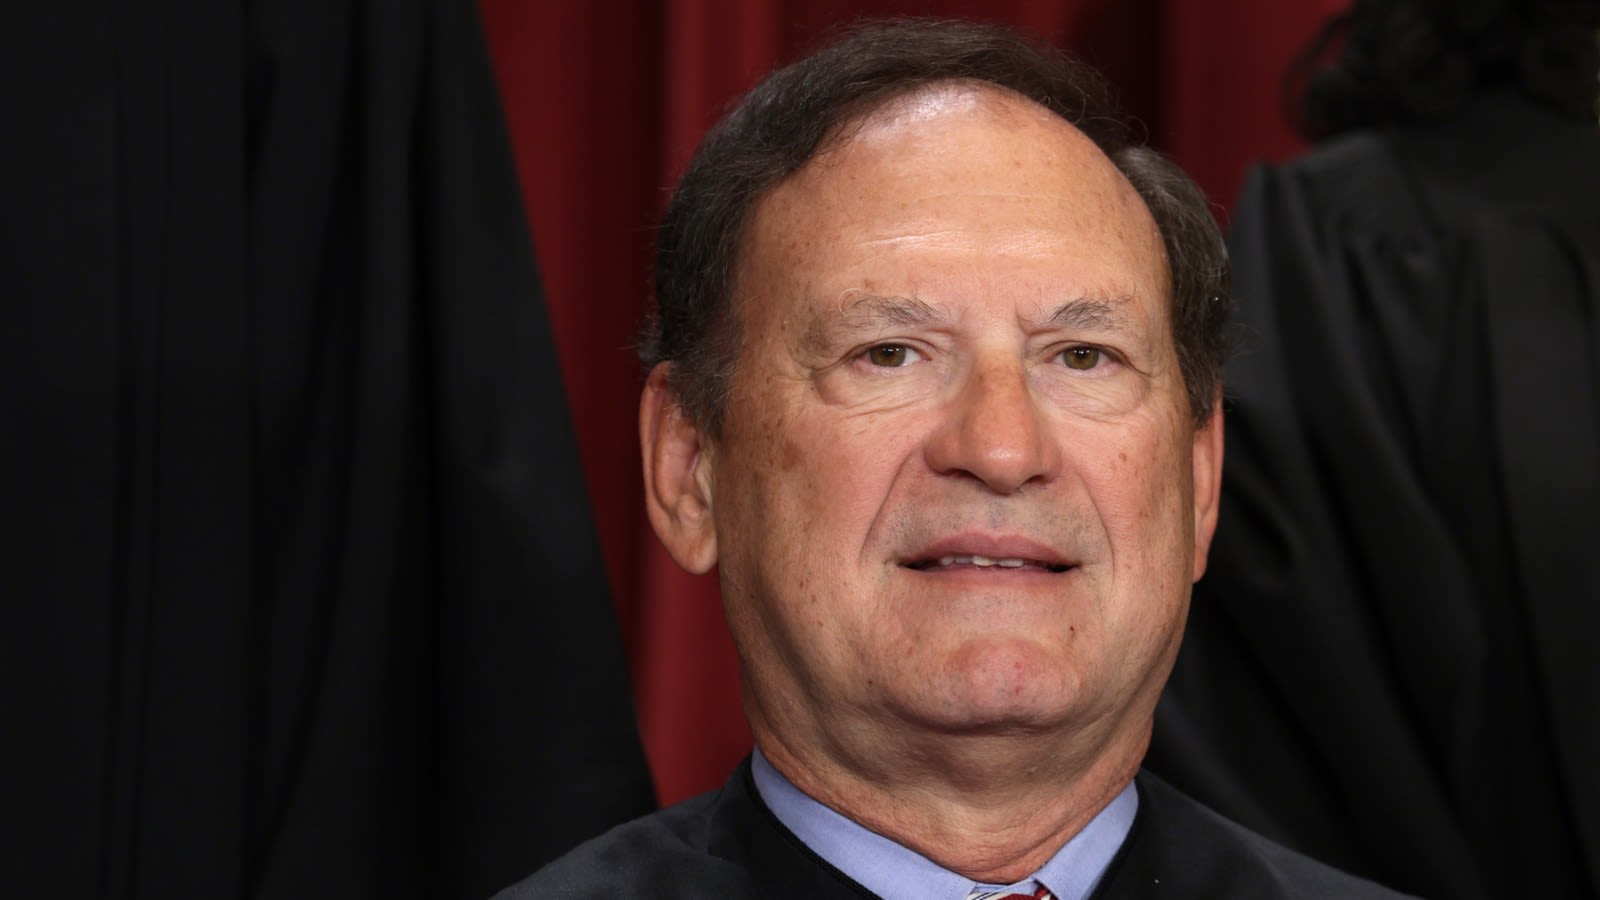 A Christian Nationalist Battle Flag Flew at Justice Alito's Vacation Home